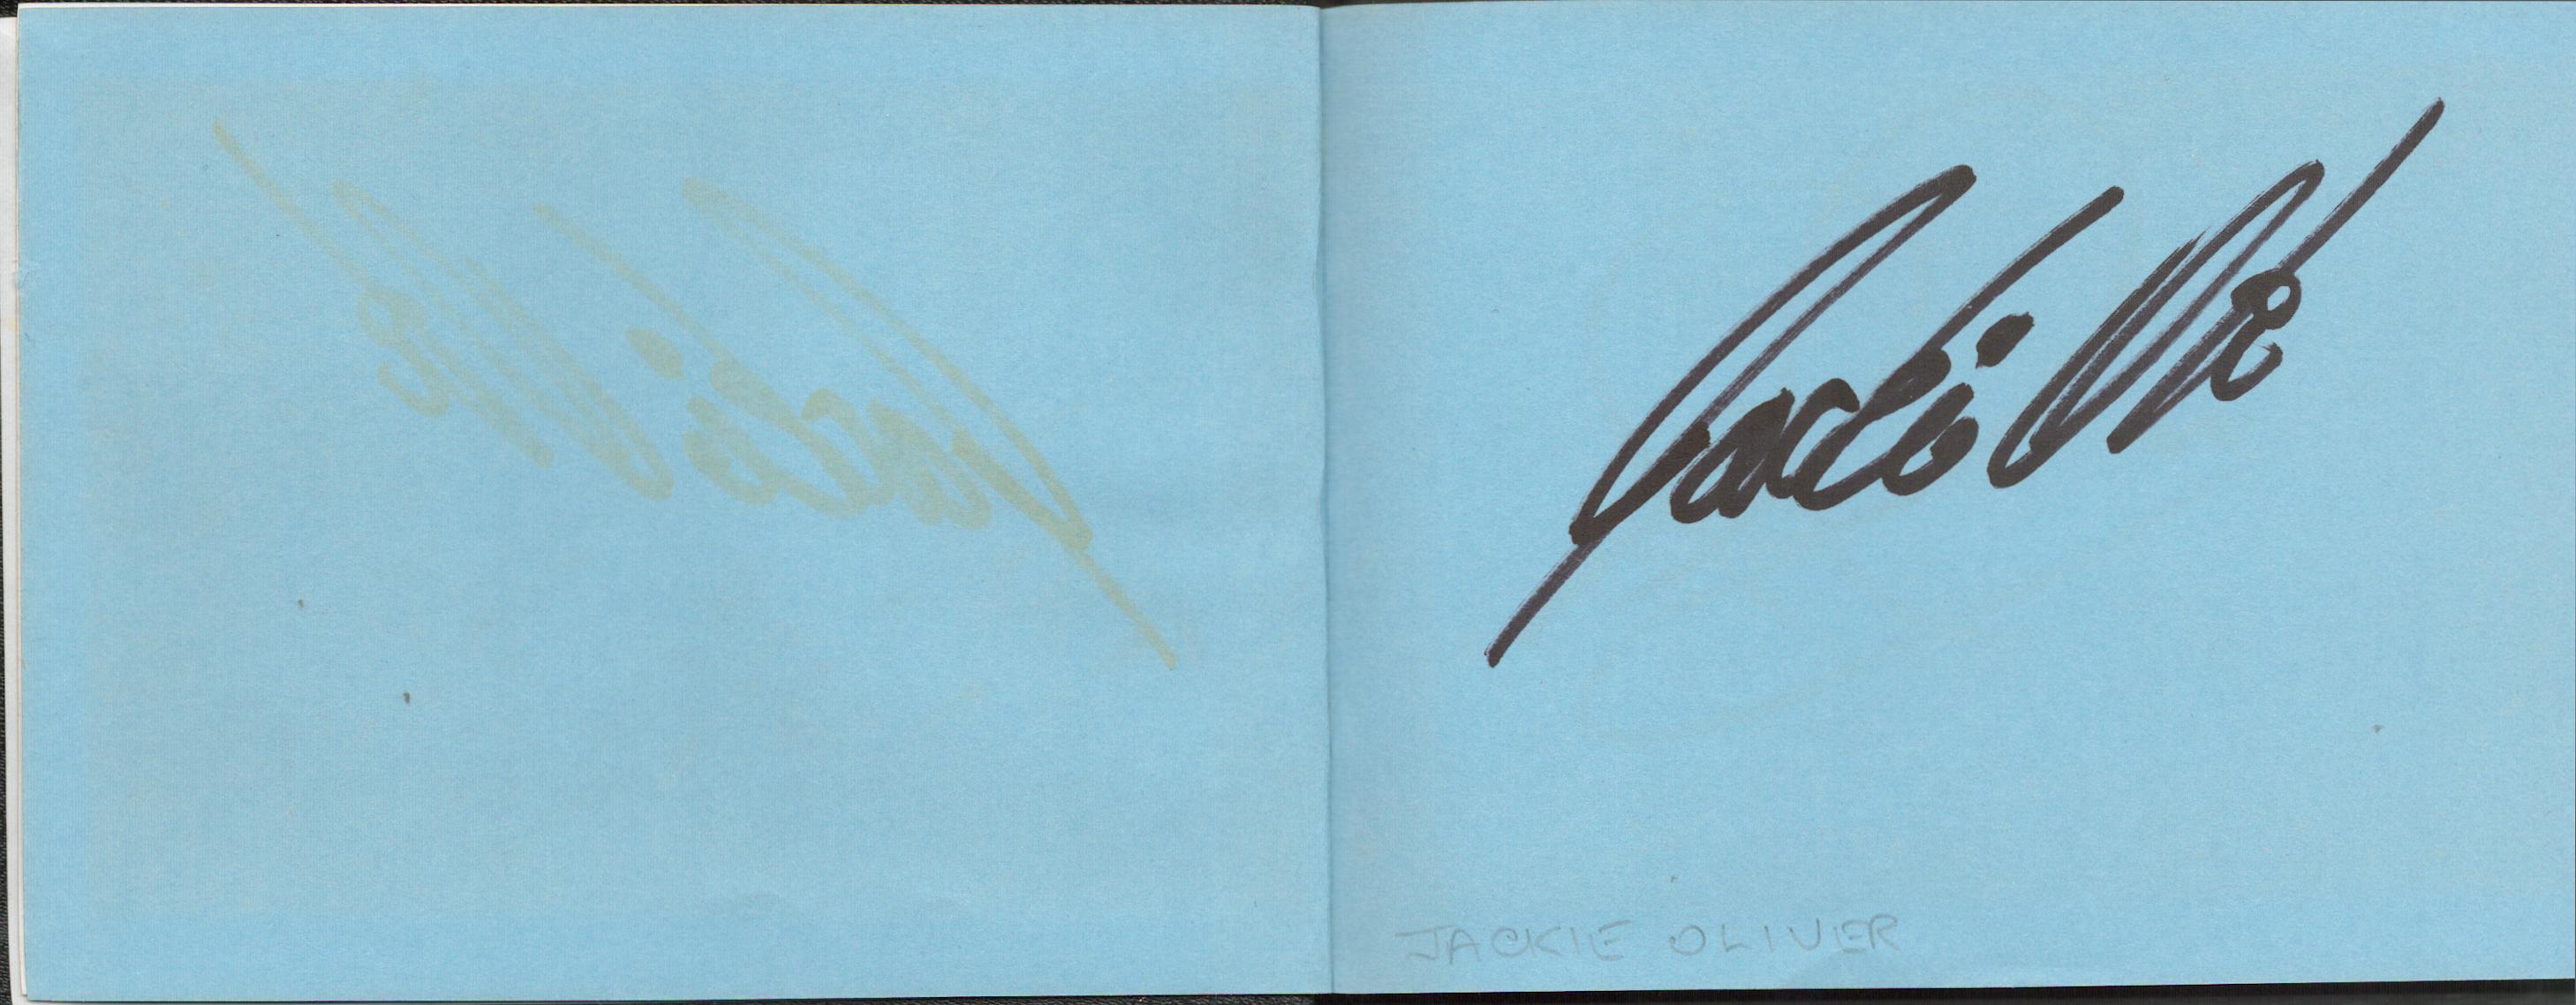 An Autograph Book Containing 25 Fantastic Signatures including Rory Underwood, Jackie Oliver, - Image 2 of 5